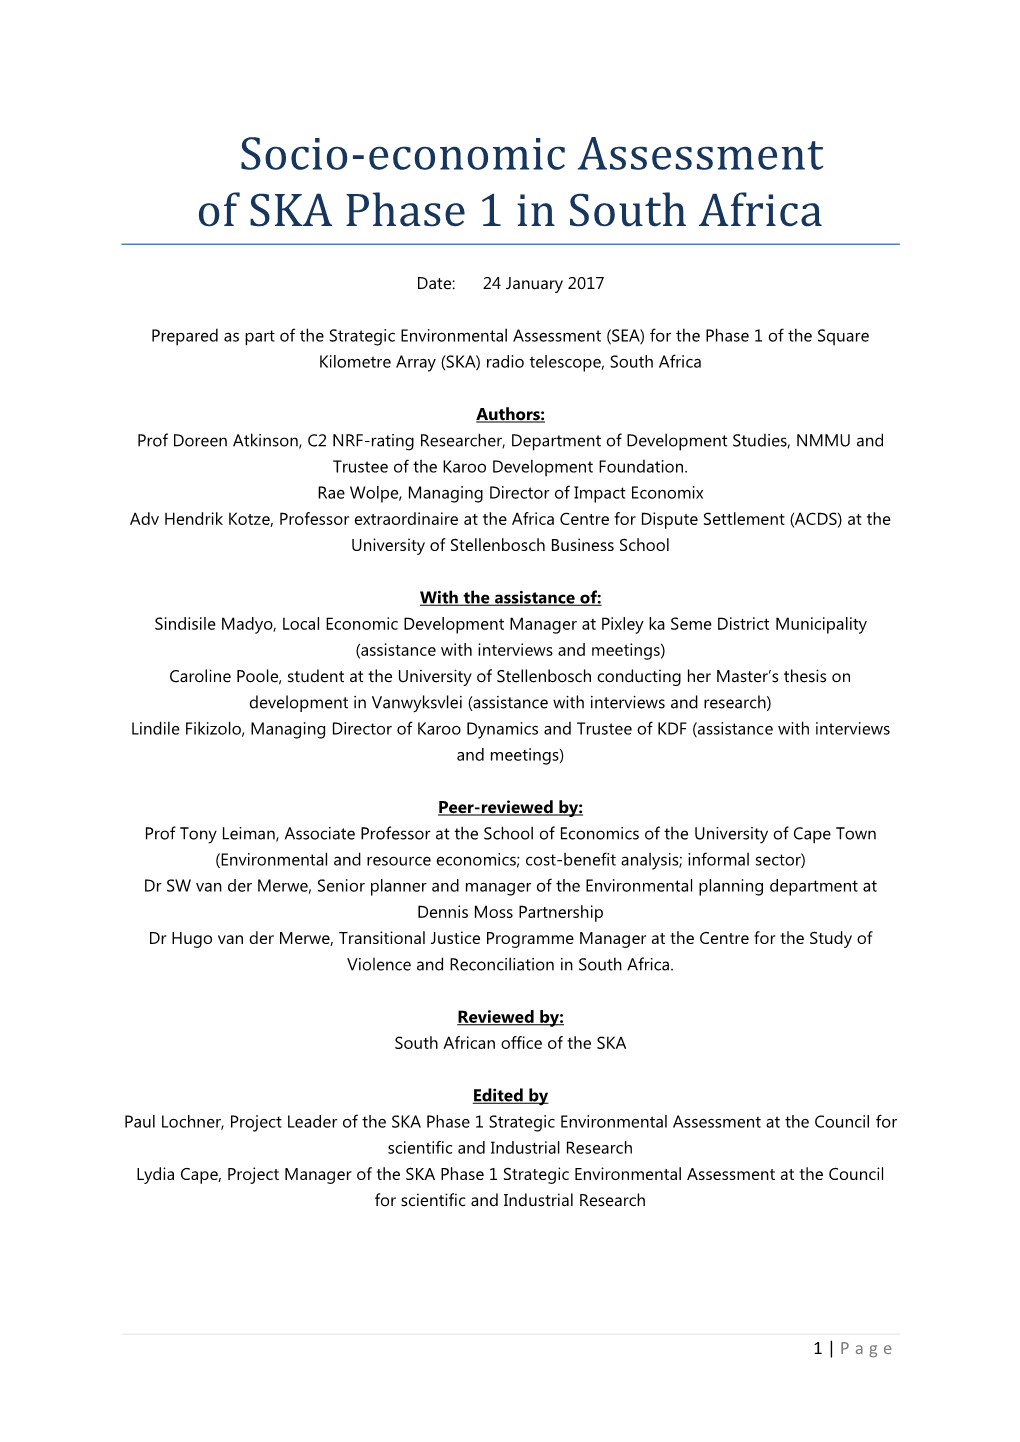 Socio-Economic Assessment of SKA Phase 1 in South Africa